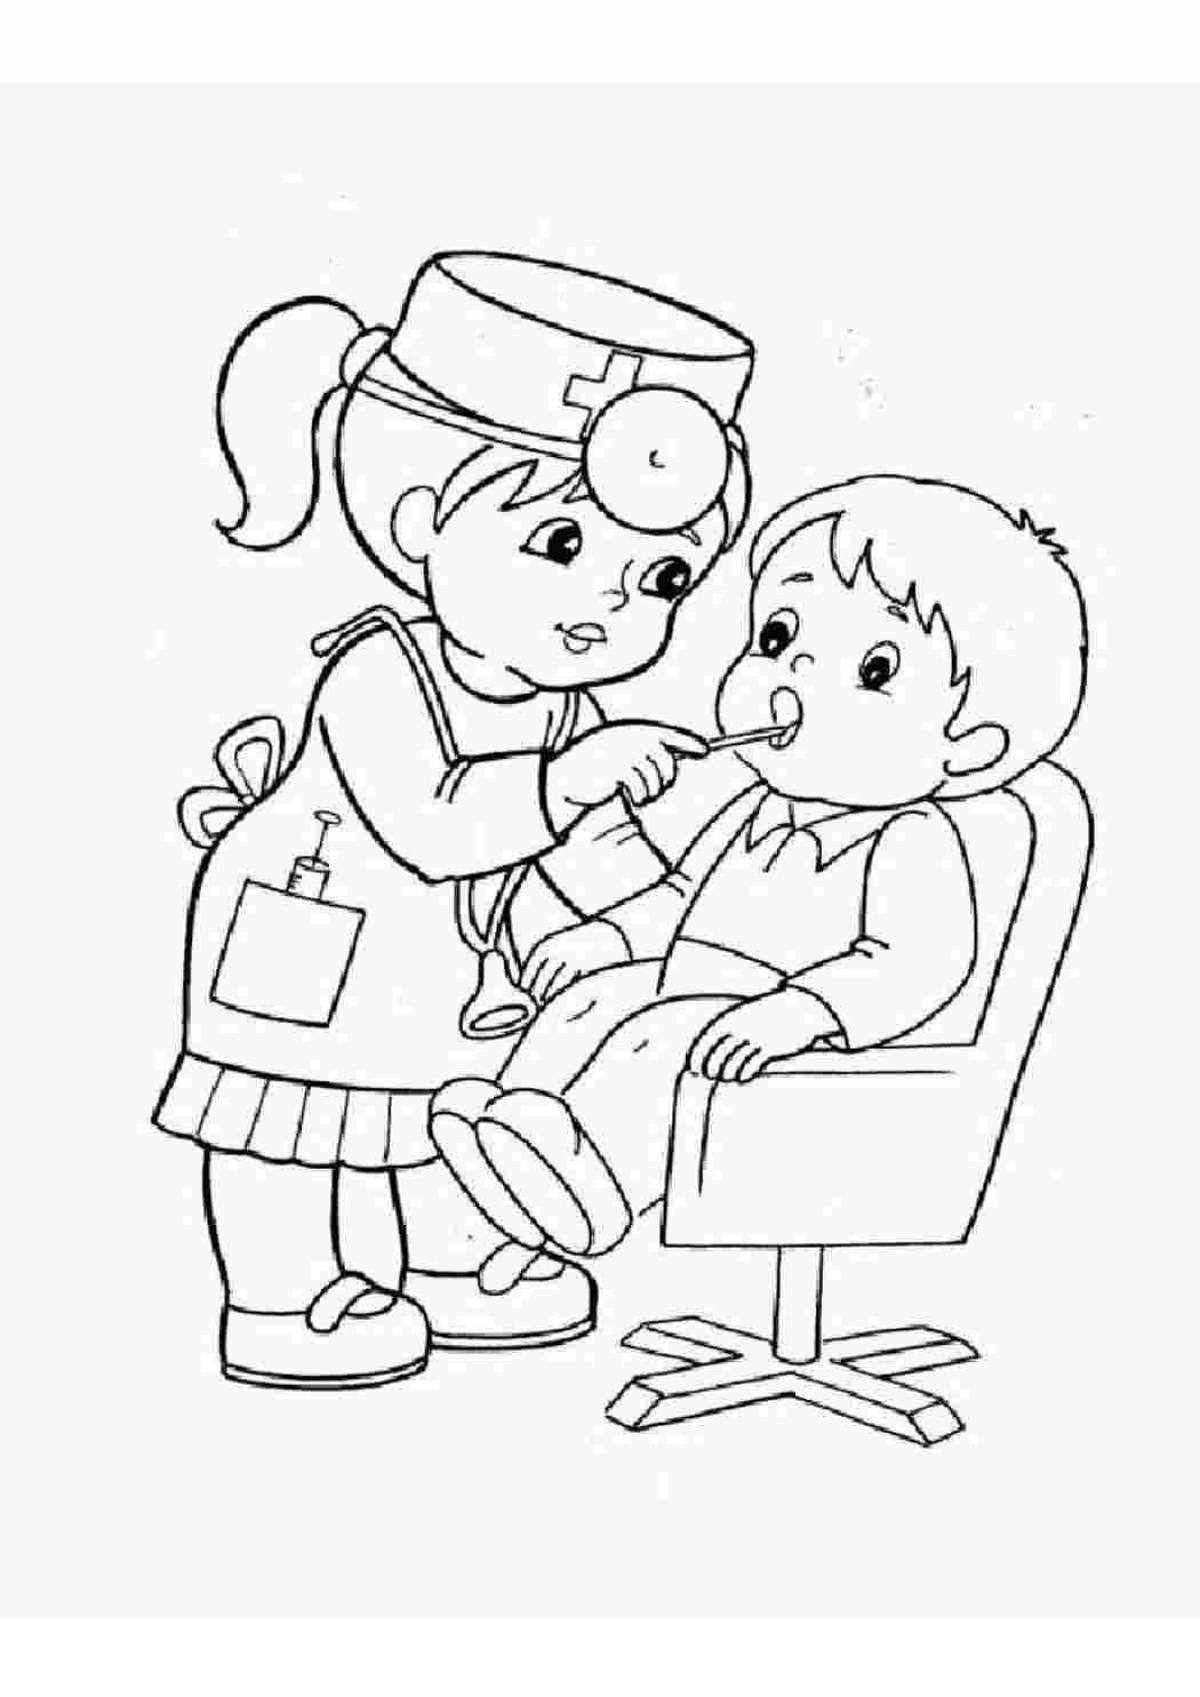 Colorful job coloring pages for the little ones